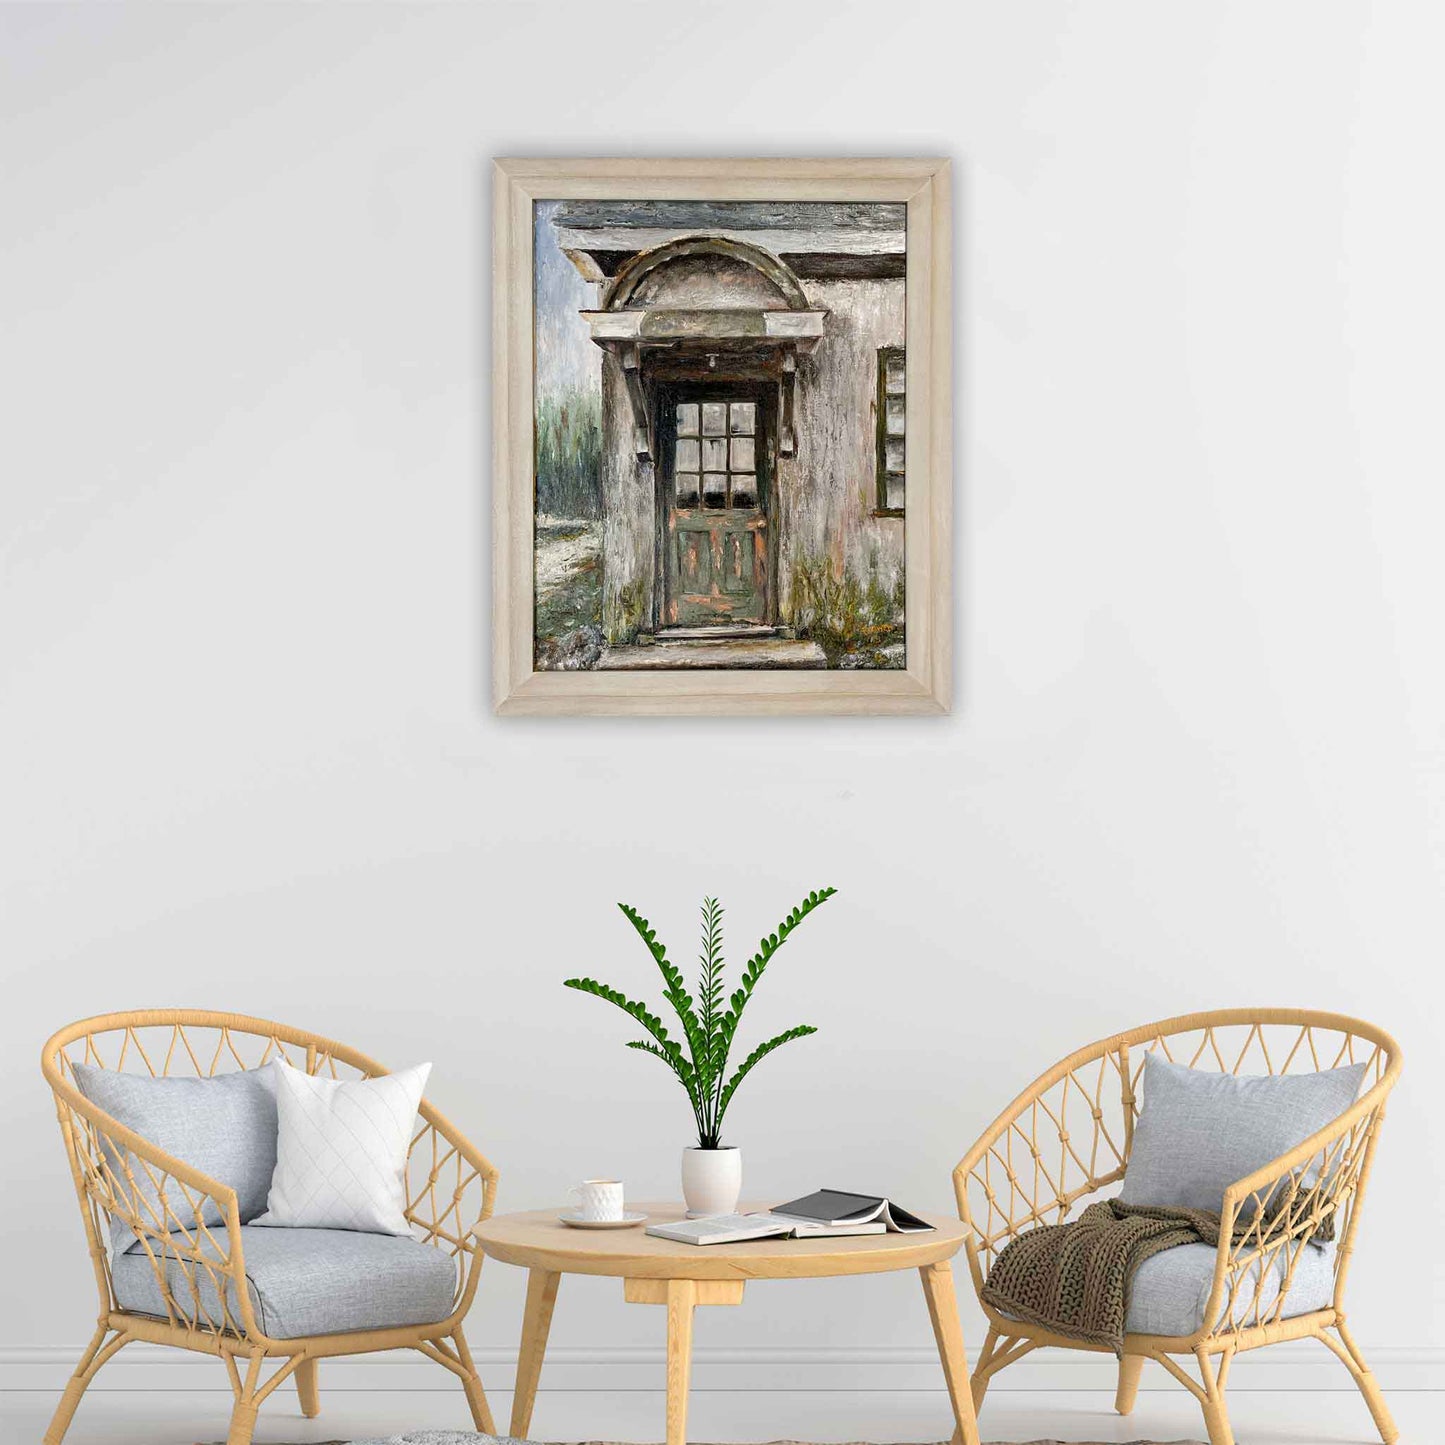 JRO Past Glory - Old Doorway Original Painting by Artist Becky Owen. Muted neutral colors showcase this old doorway with its peeling and faded paint. One bare lightbulb hangs to defy the night. 20" x 24" framed painting in a beige wooden frame. Ready to hang.